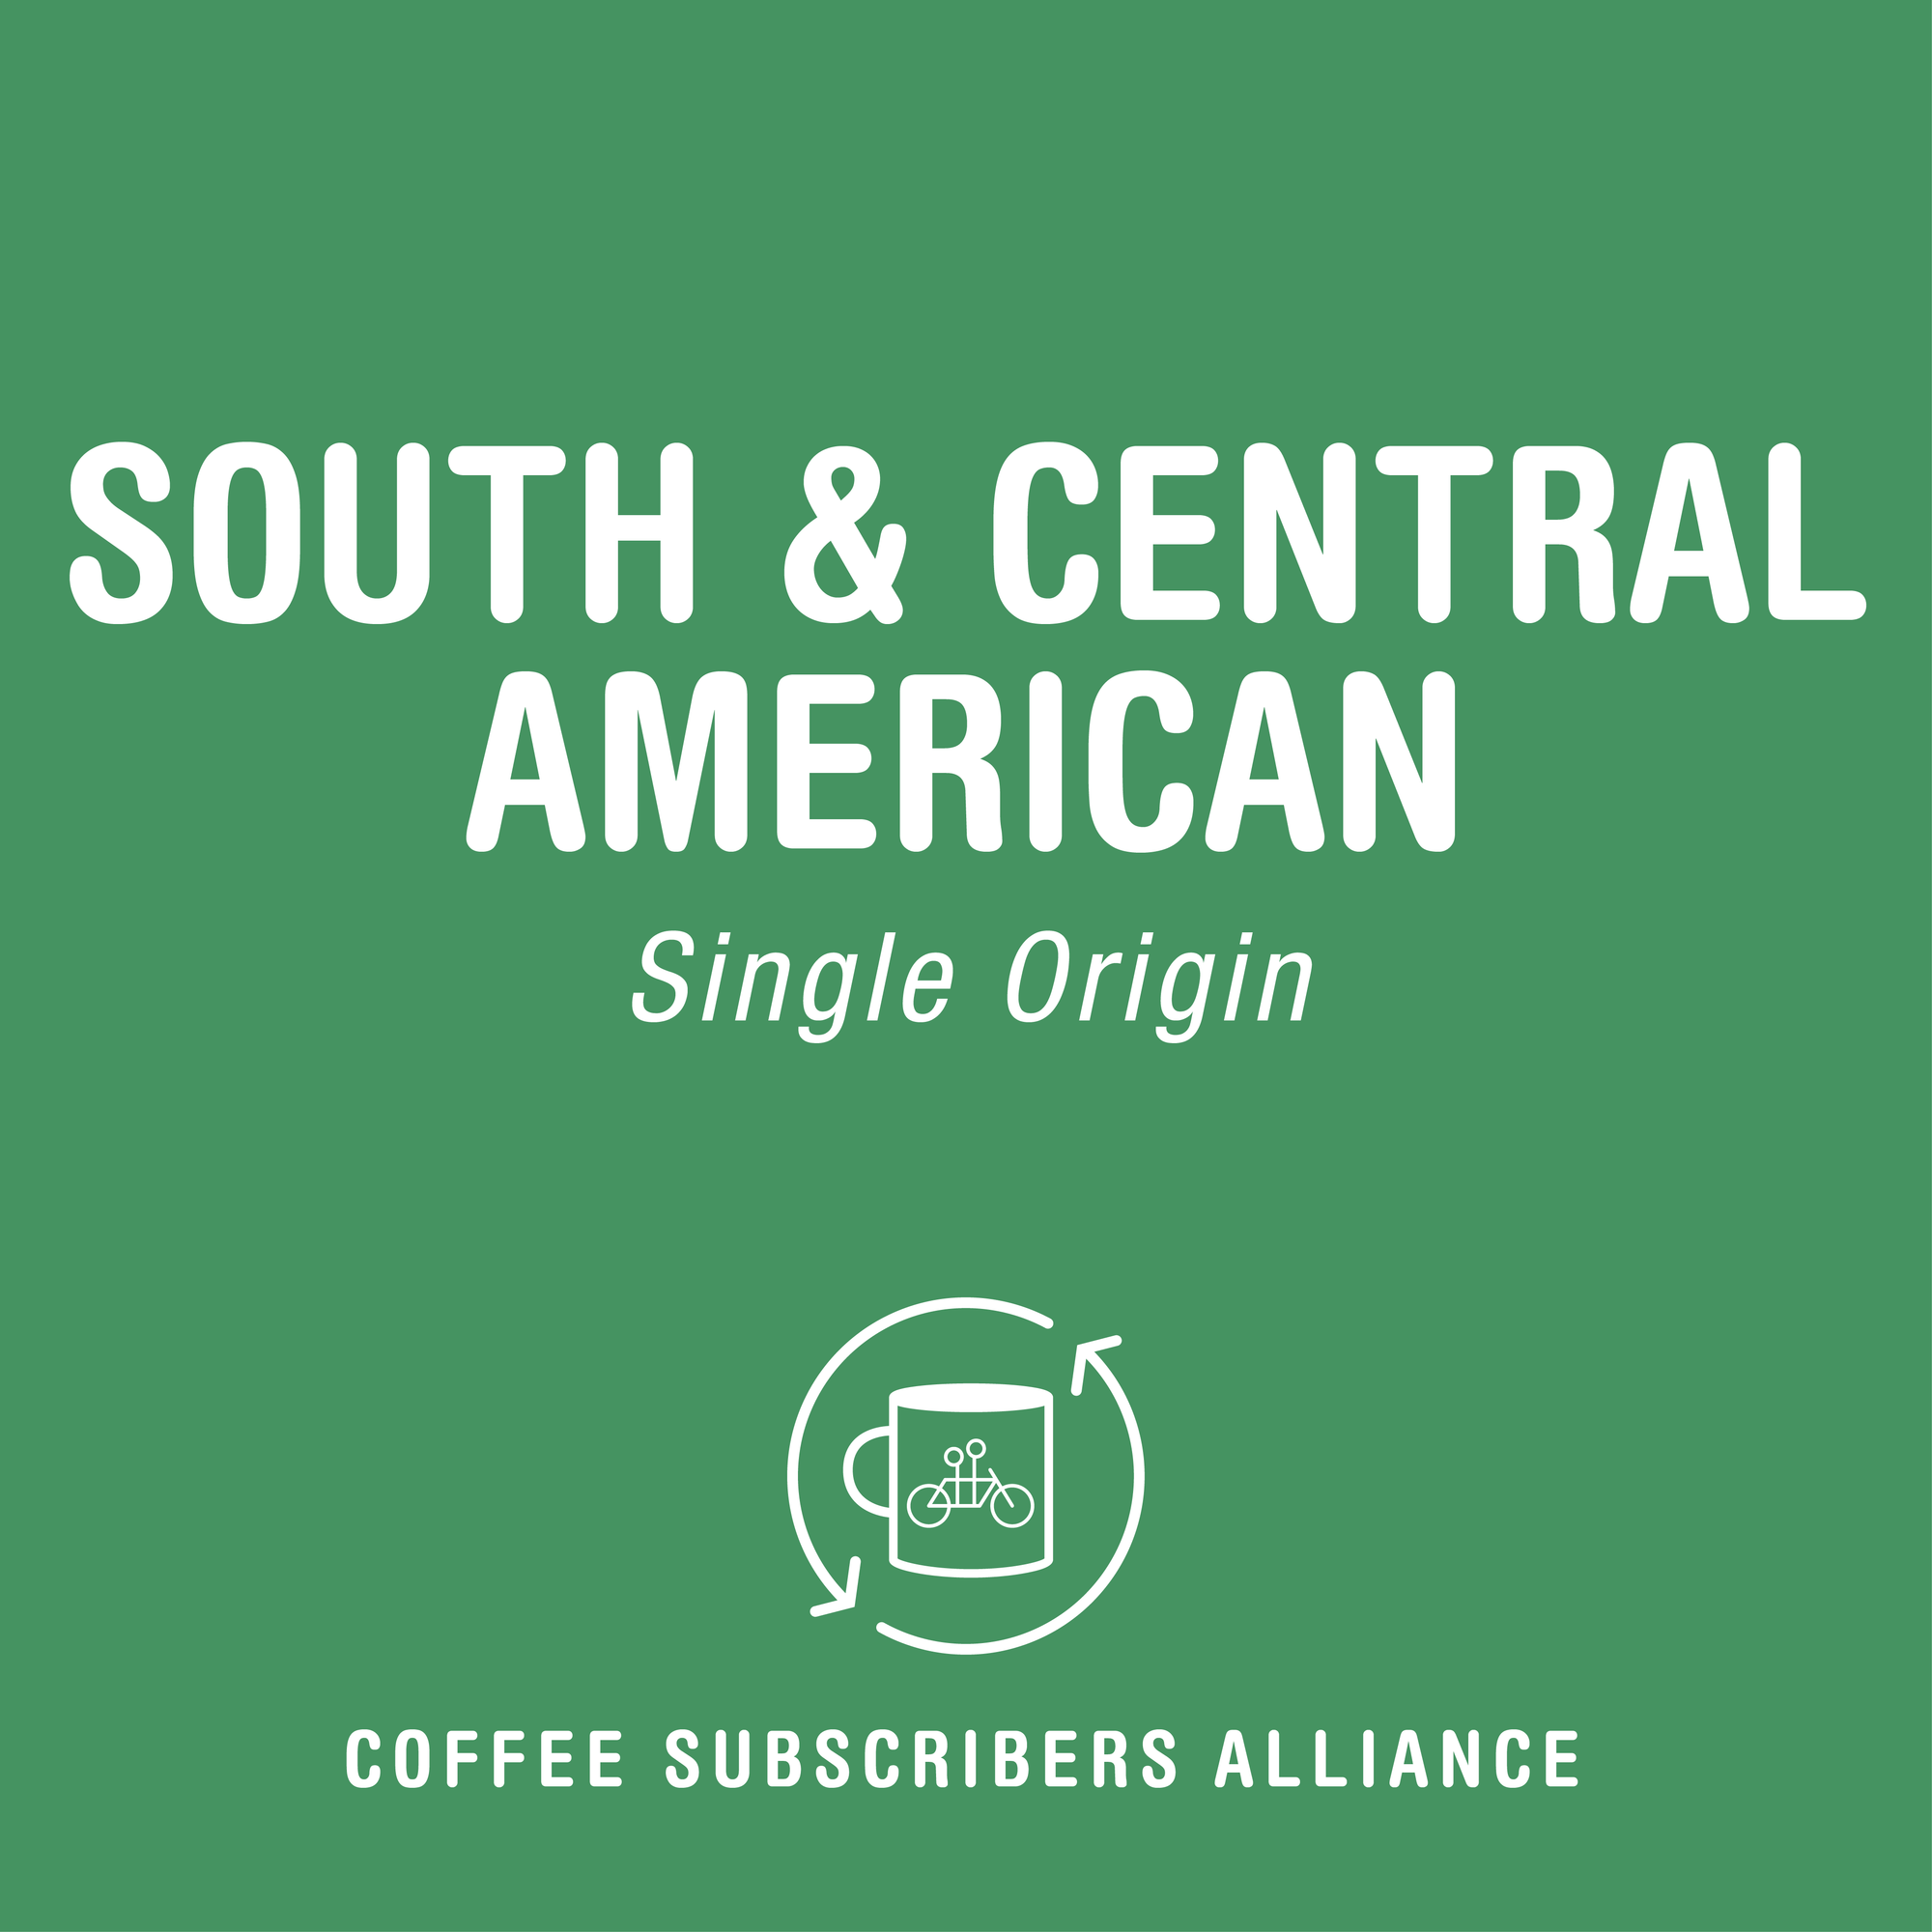 Graphic design for the Tandem Coffee Roasters' "South & Central American Subscription Gift - 1 Week x 12" featuring text "south & central american single origin" with a logo depicting a coffee cup encircled by a bicycle on a green background.